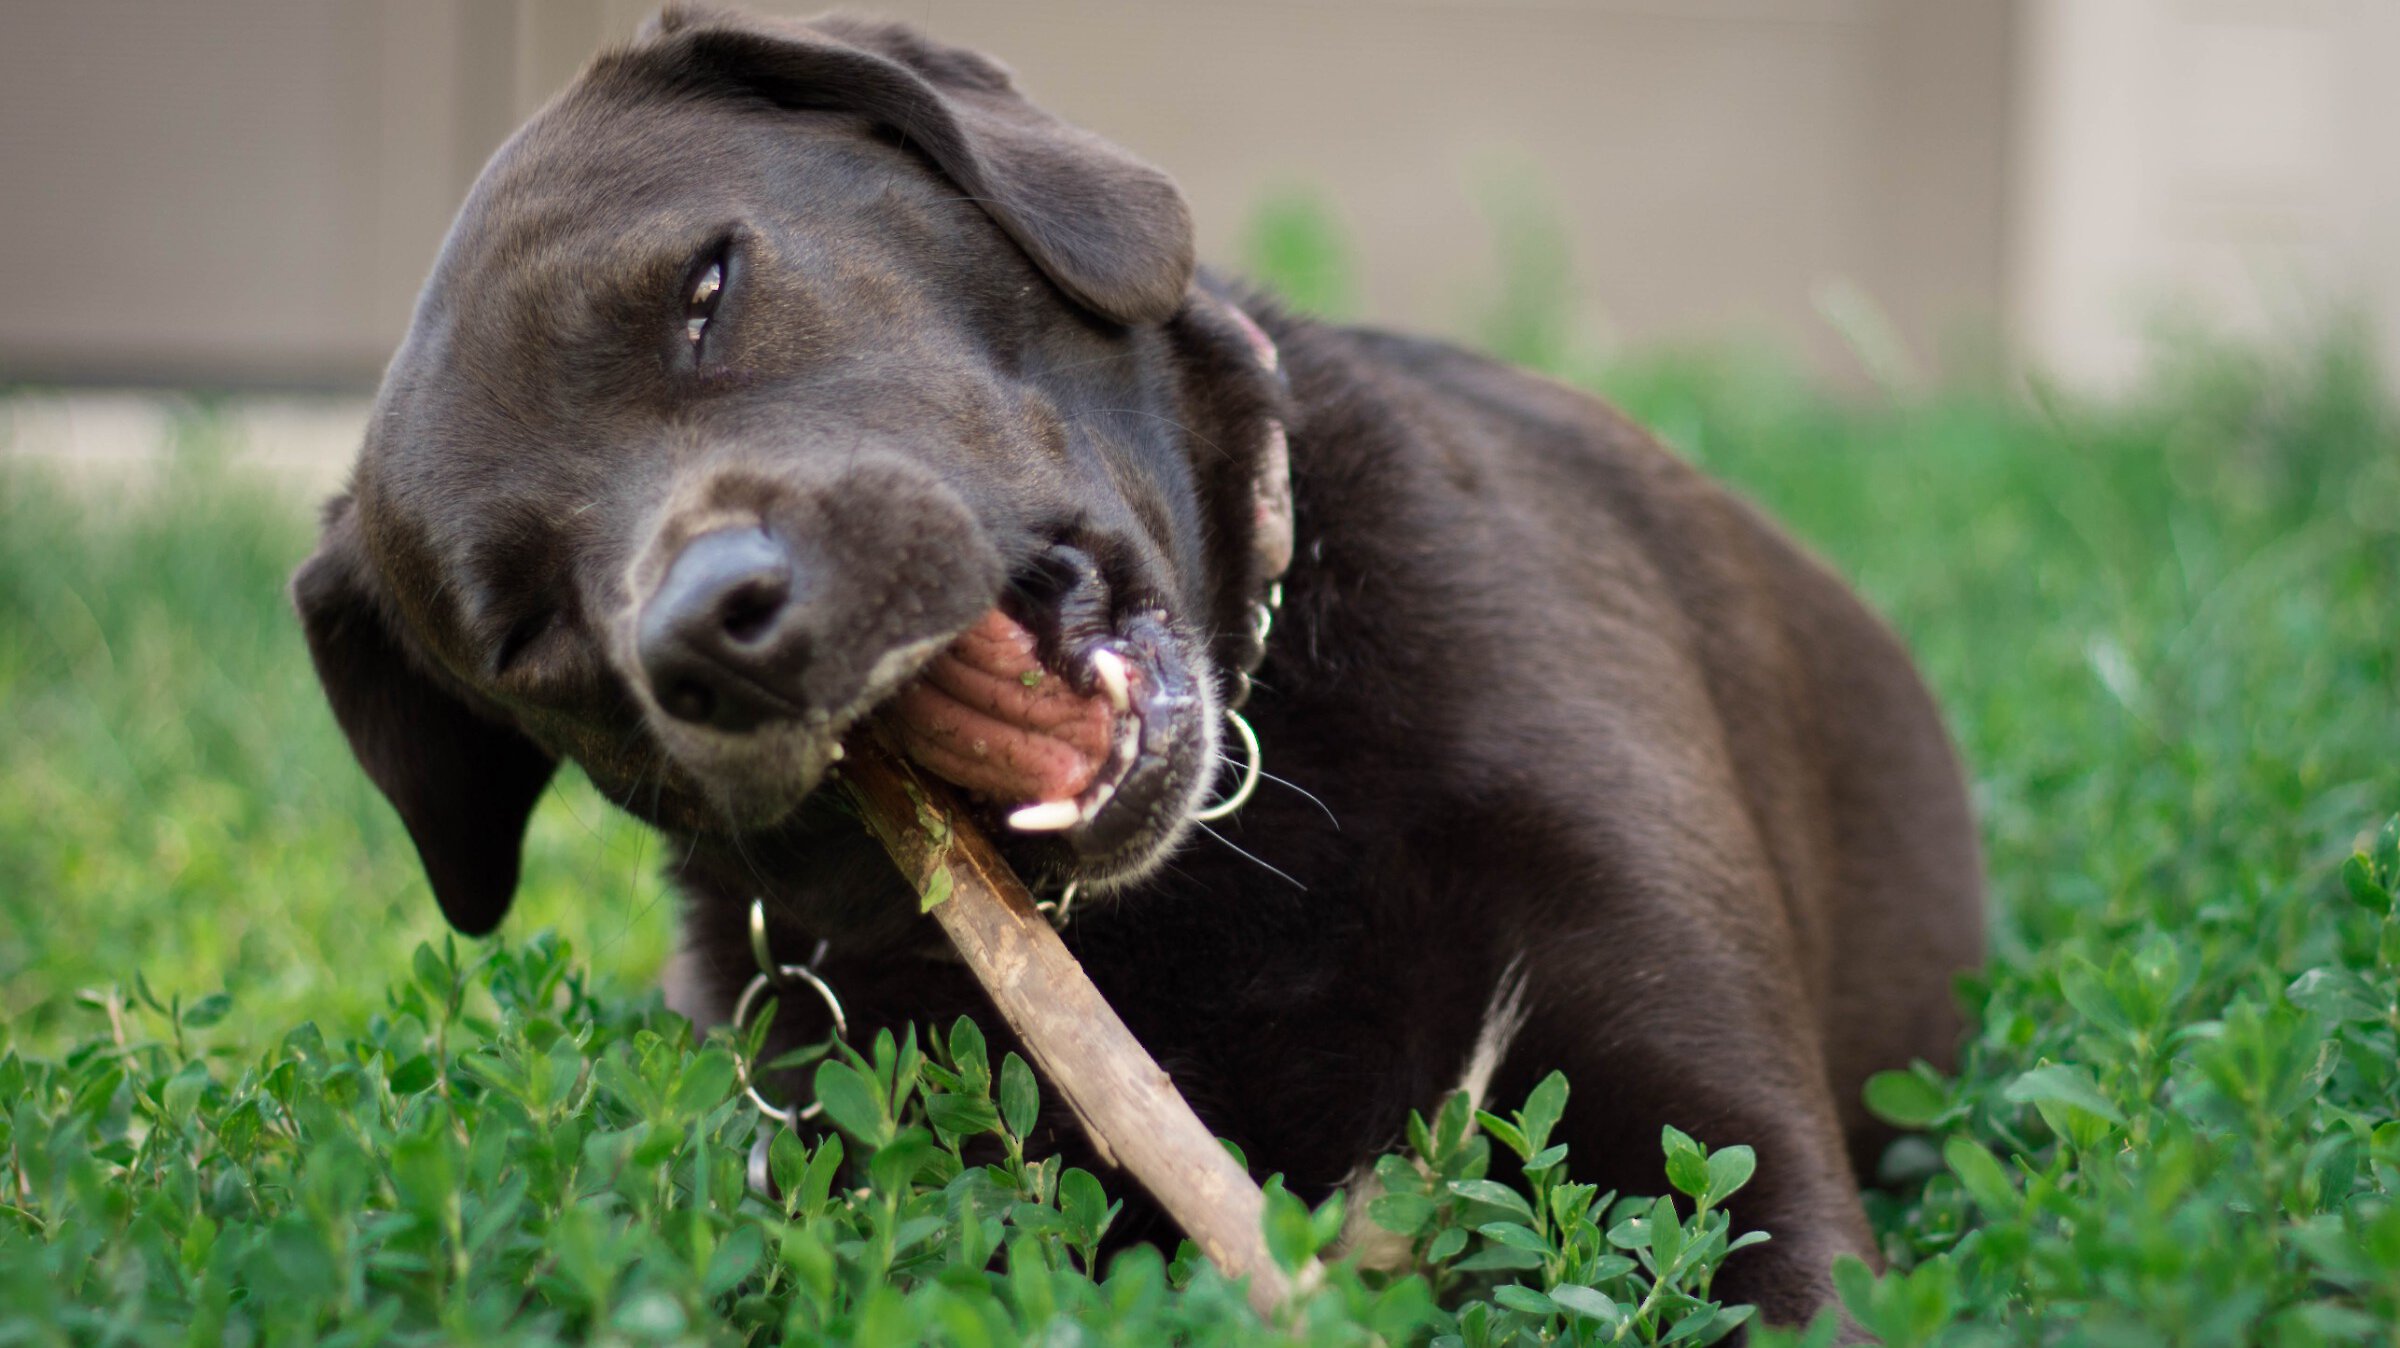 Dog chewing on stick while lying on the grass